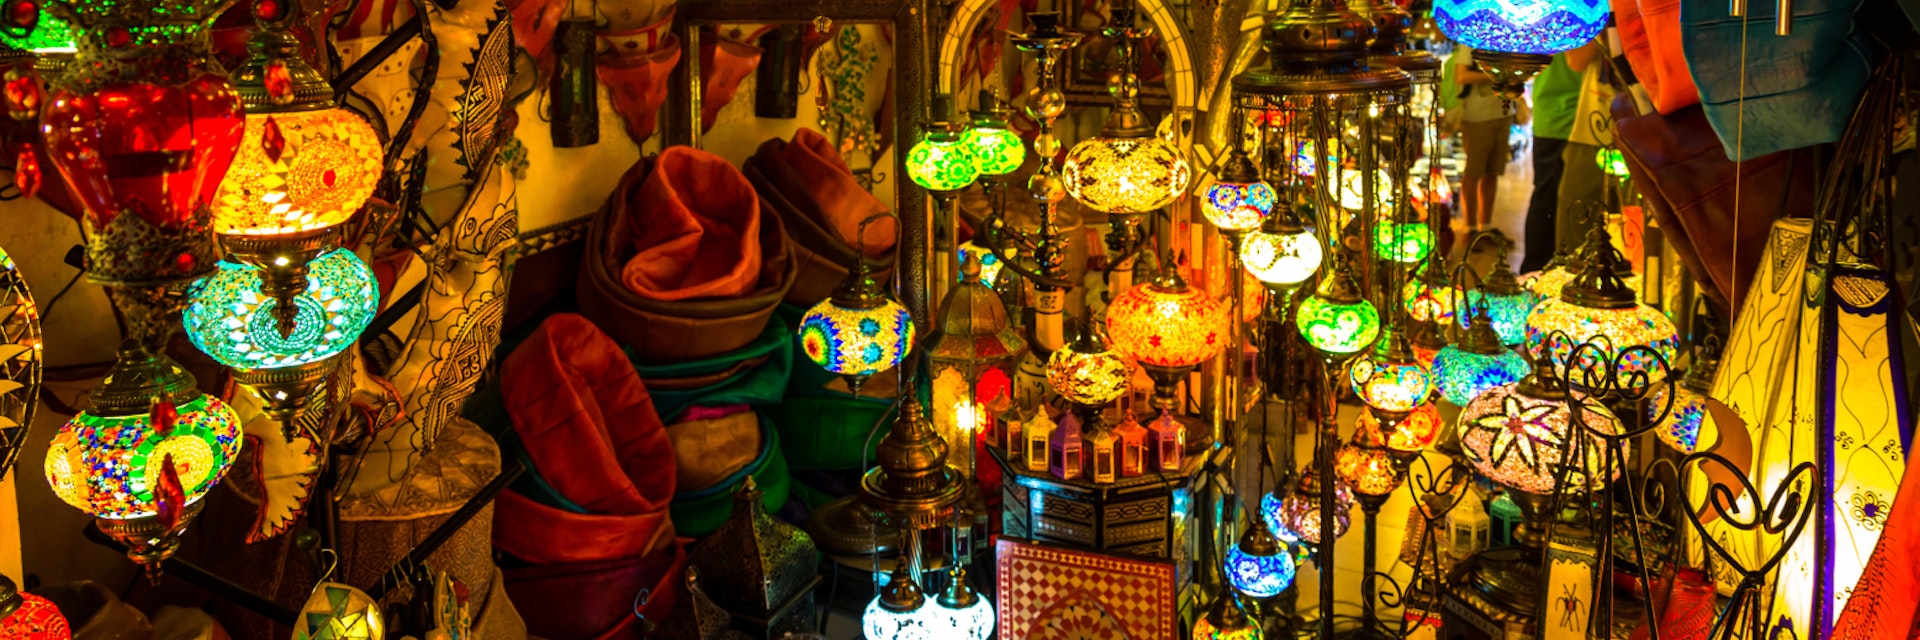 Arabic lamps and lanterns in the Marrakesh,Morocco; Shutterstock ID 339262838; Your name (First / Last): Lauren Keith; GL account no.: 65050; Netsuite department name: Online Editorial; Full Product or Project name including edition: Responsible travel Marrakesh article